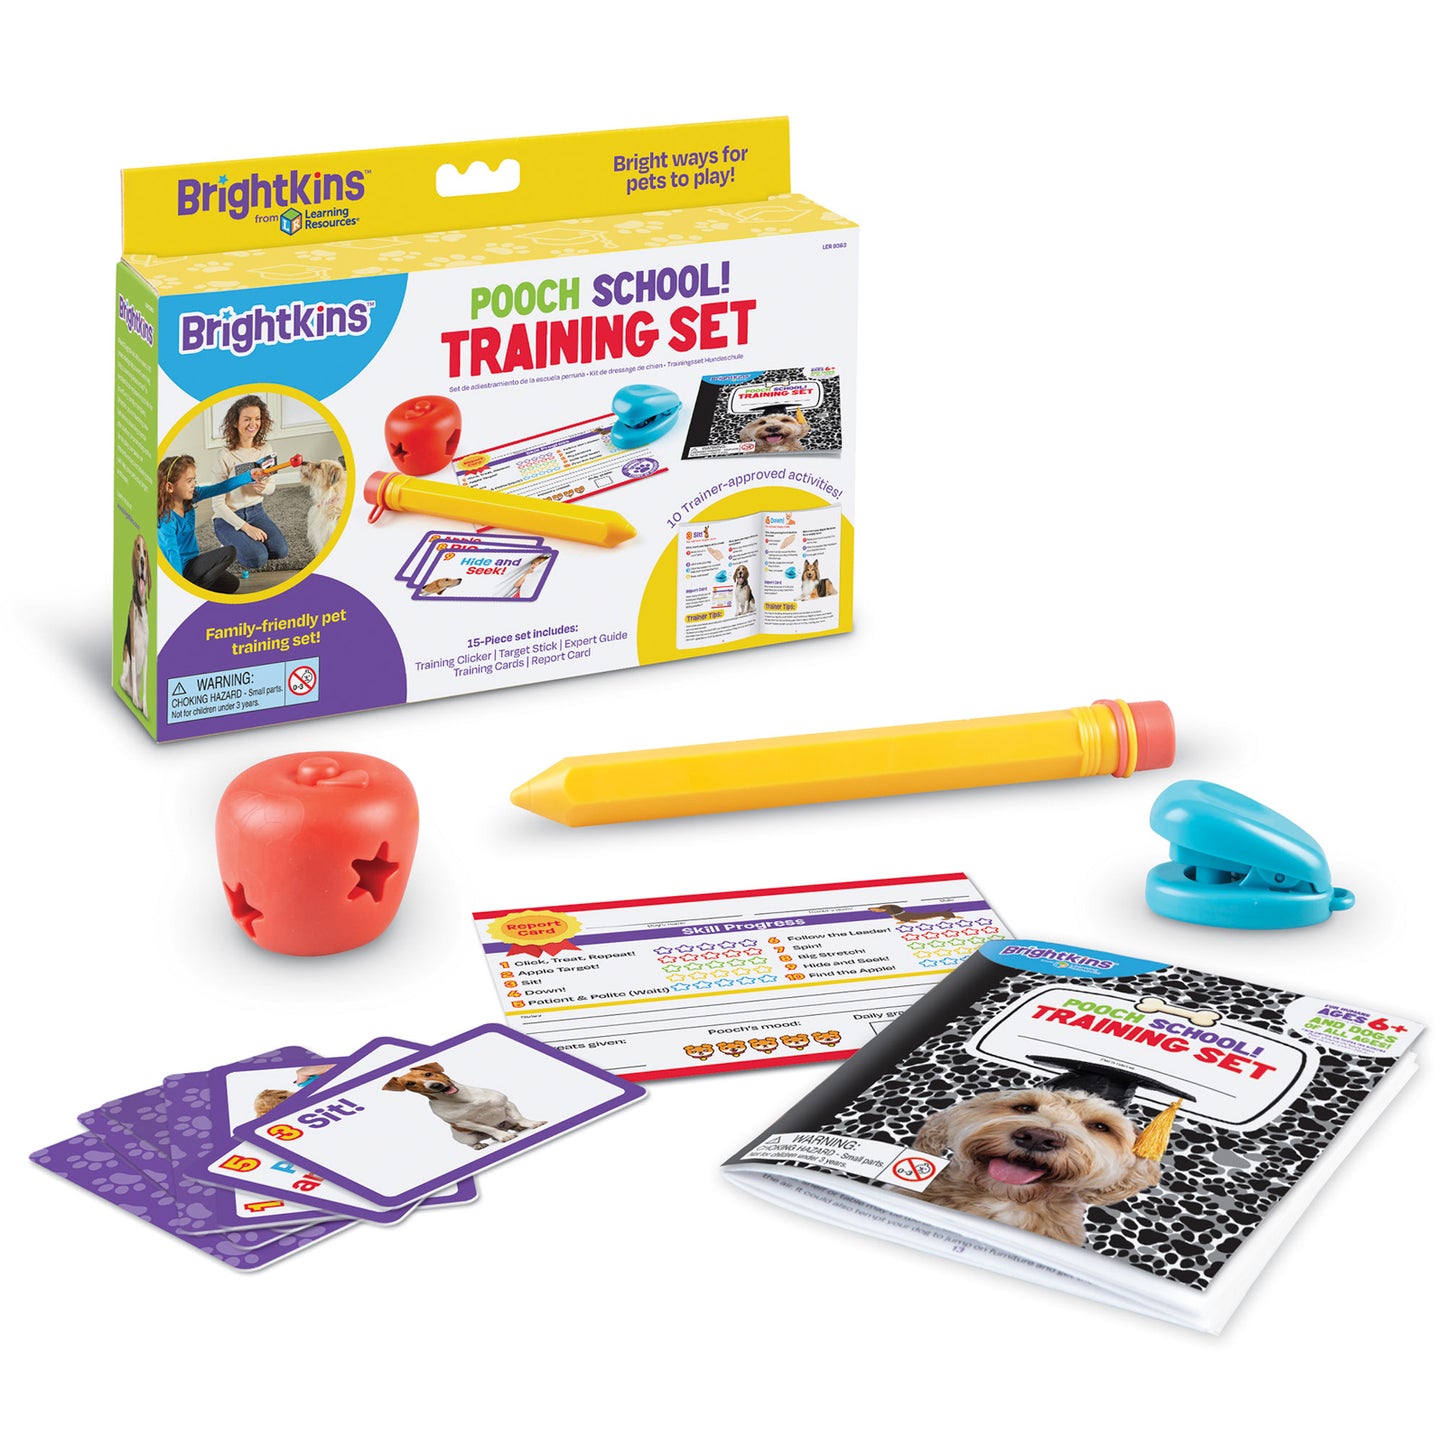 A Product box for Pooch School Dog Training Set with contents in front of it: a fake pencil, an apple toy with star shaped cutouts, a training booklet and a set of training cue cards